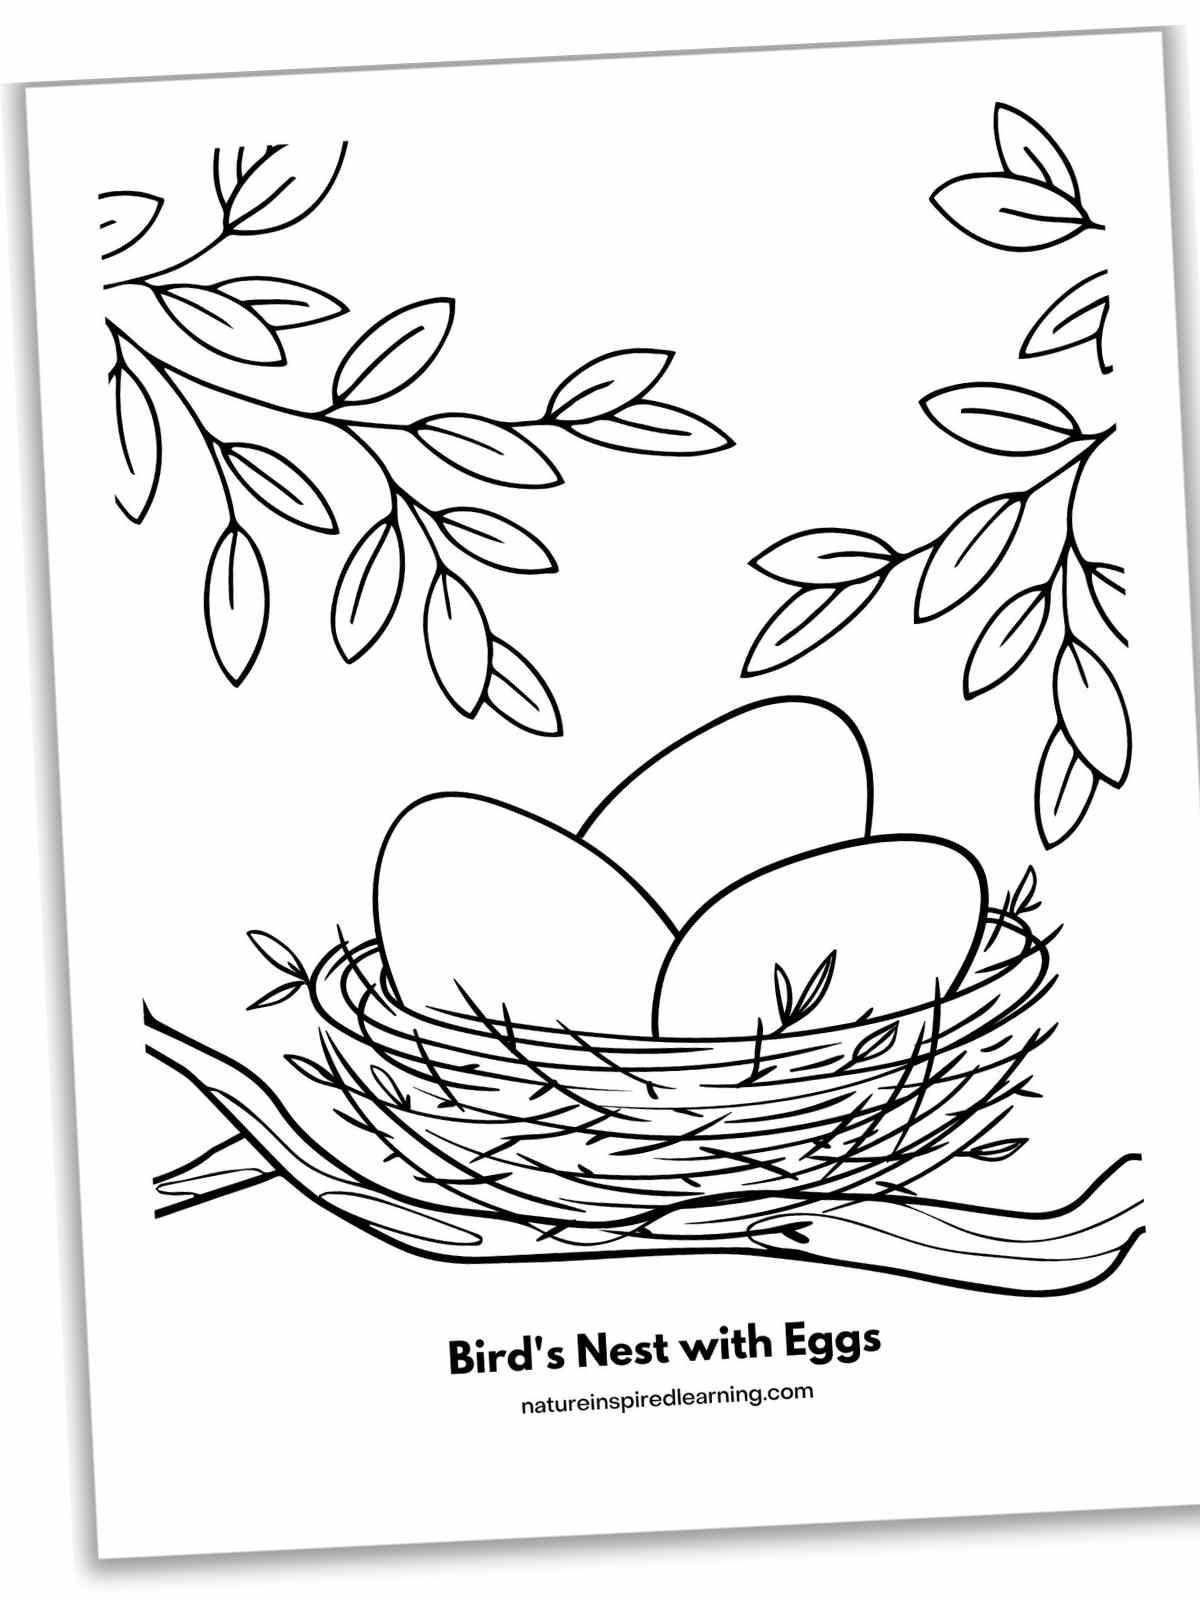 birds nest on a tree branch with three eggs inside with leaves on branches above. Printable slanted with a drop shadow.